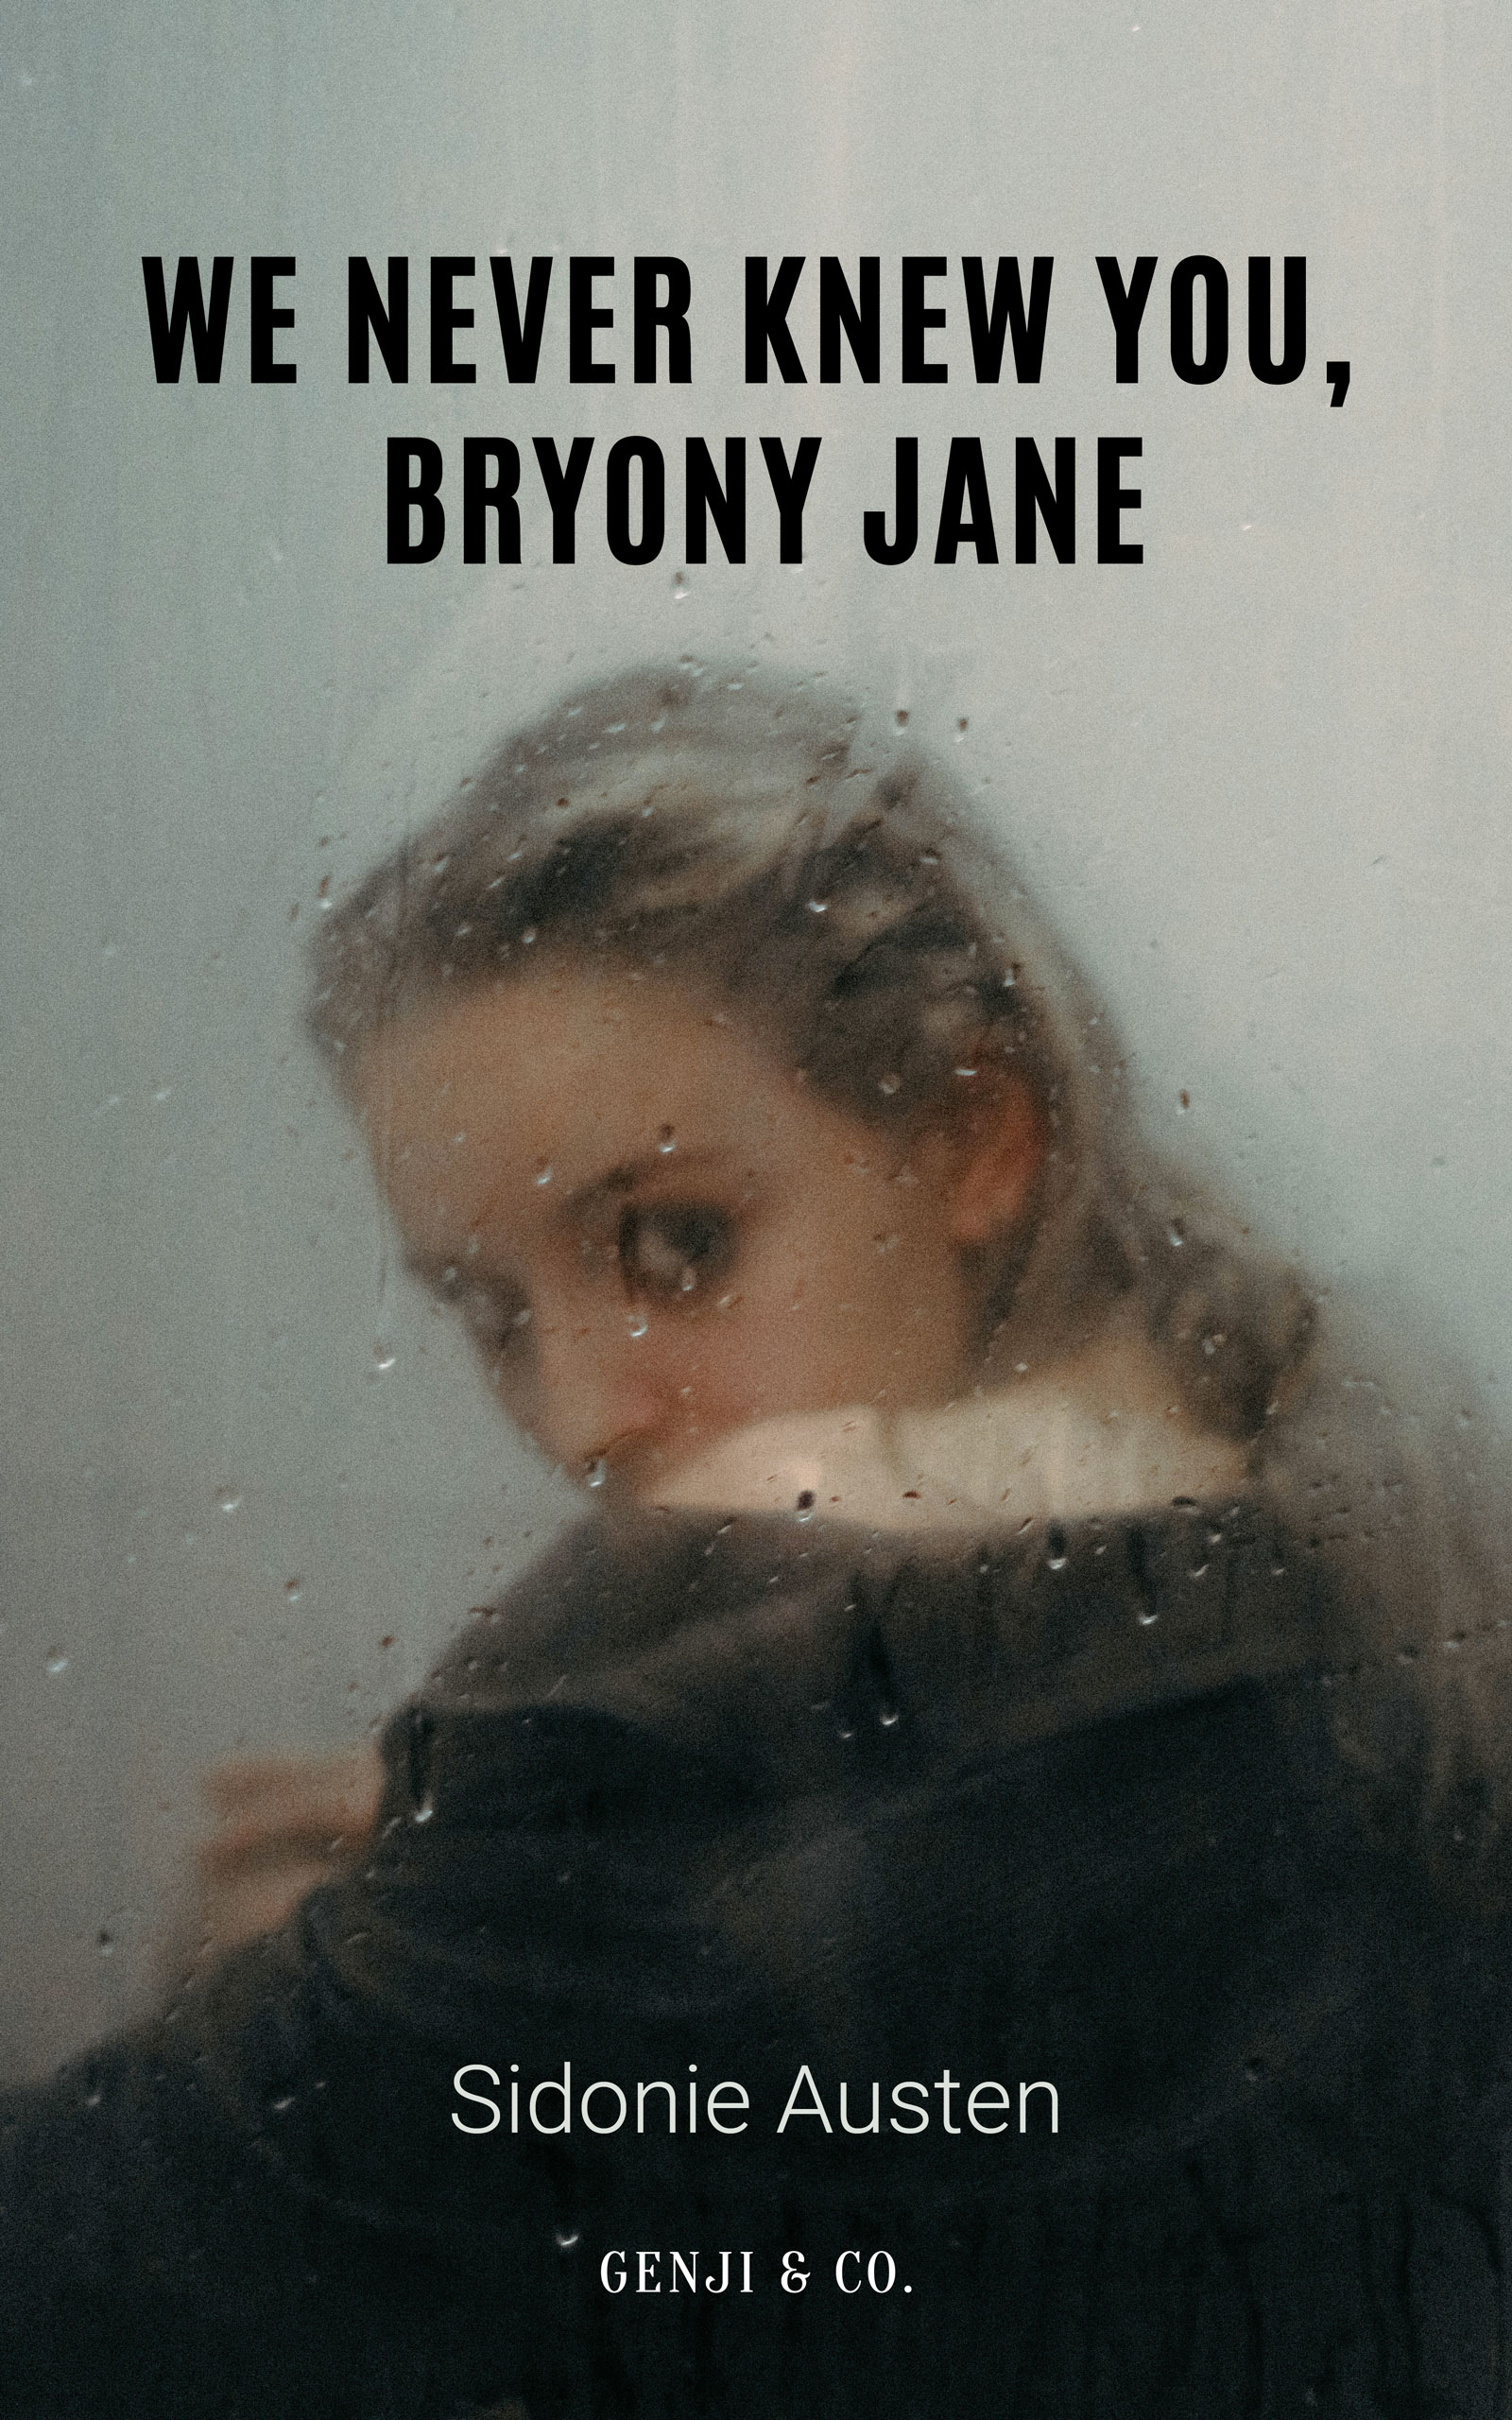 We never knew you, Bryony Jane